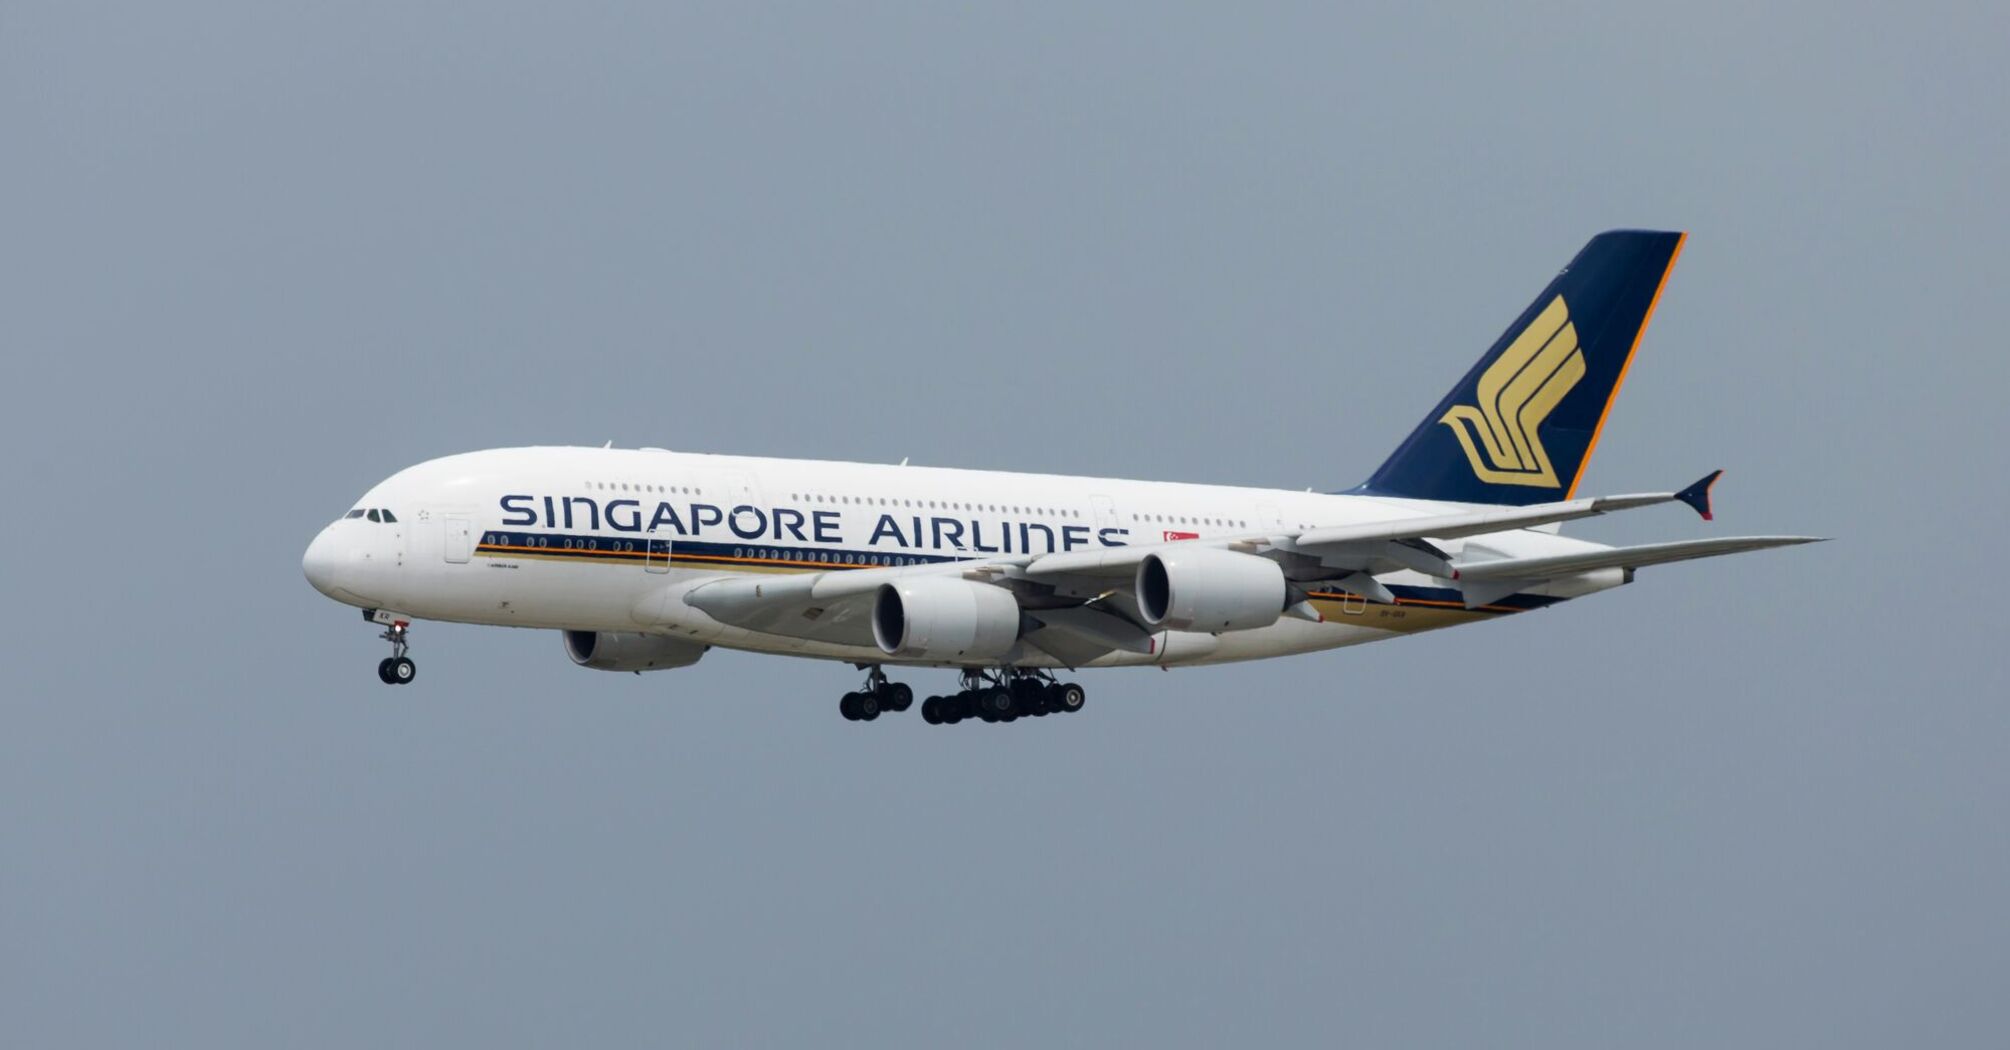 Singapore airliner in the air